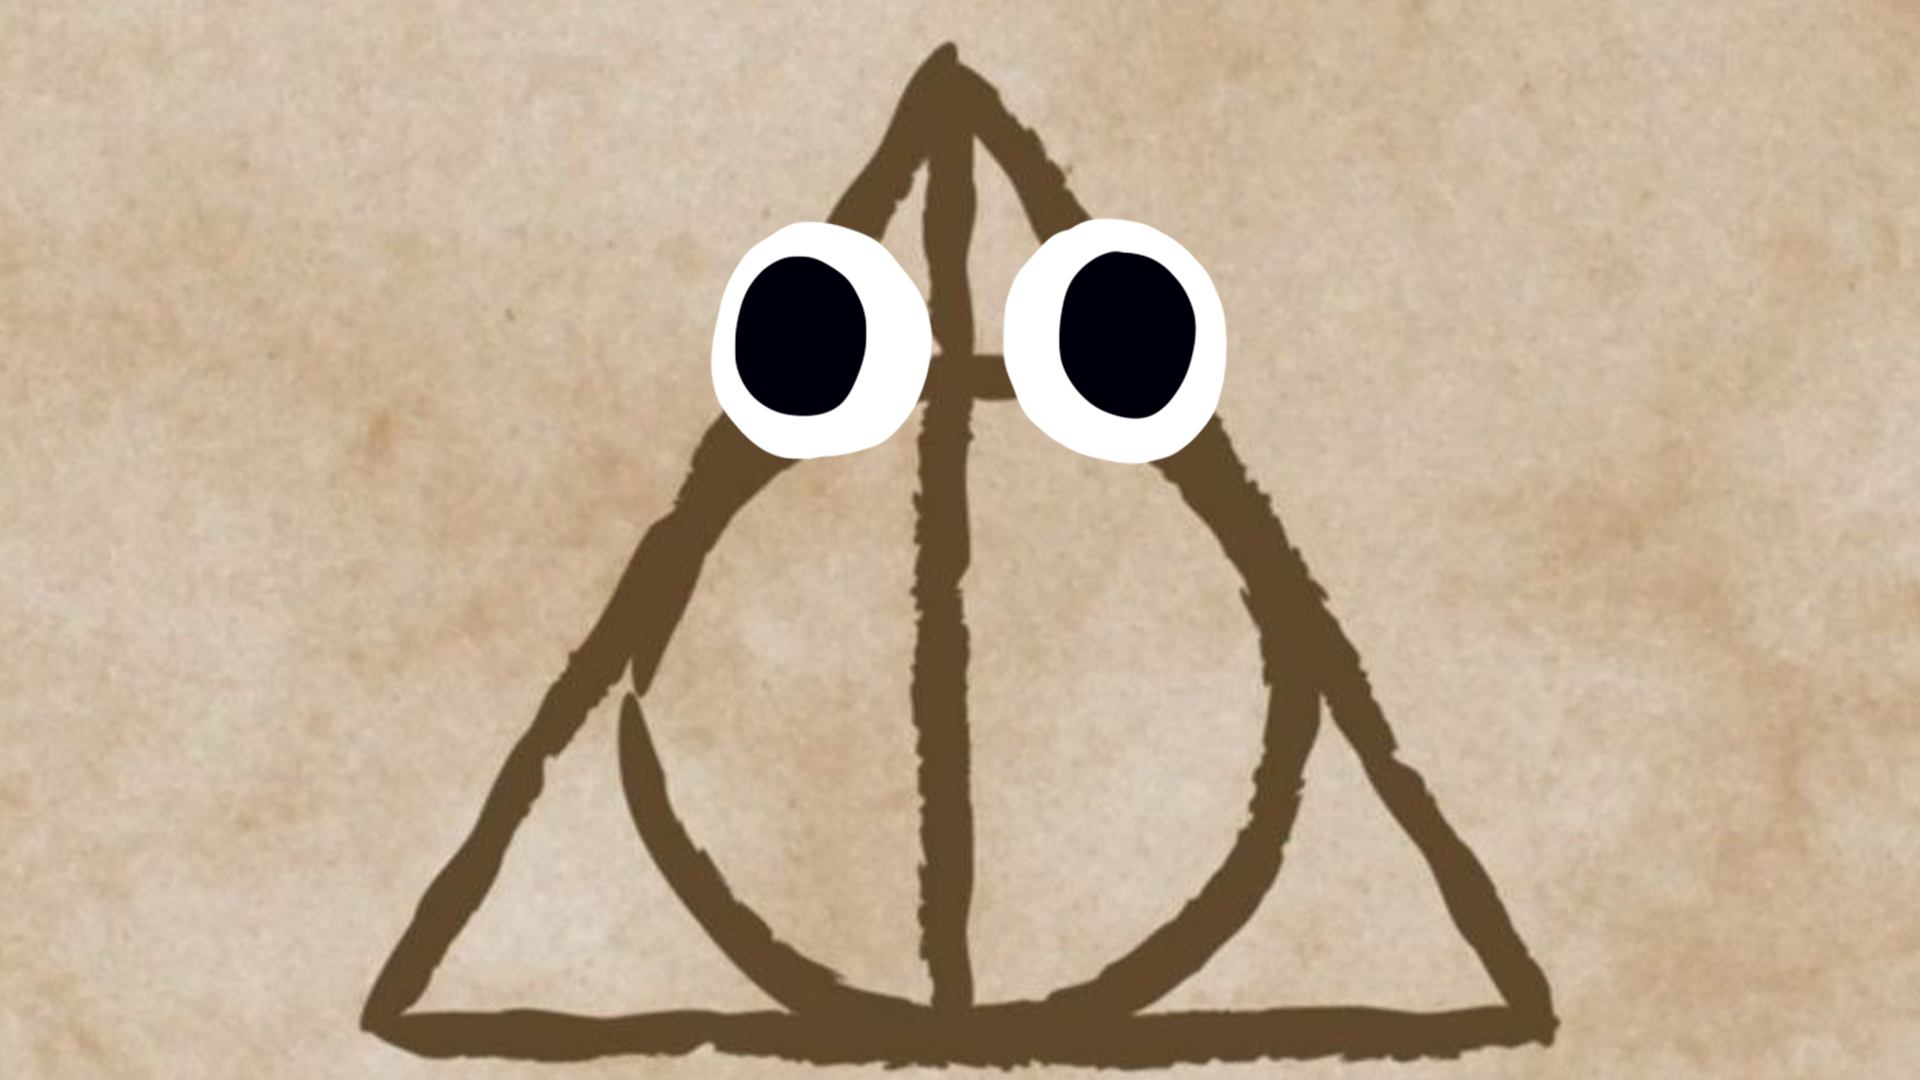 Deathly Hallows sign with eyes